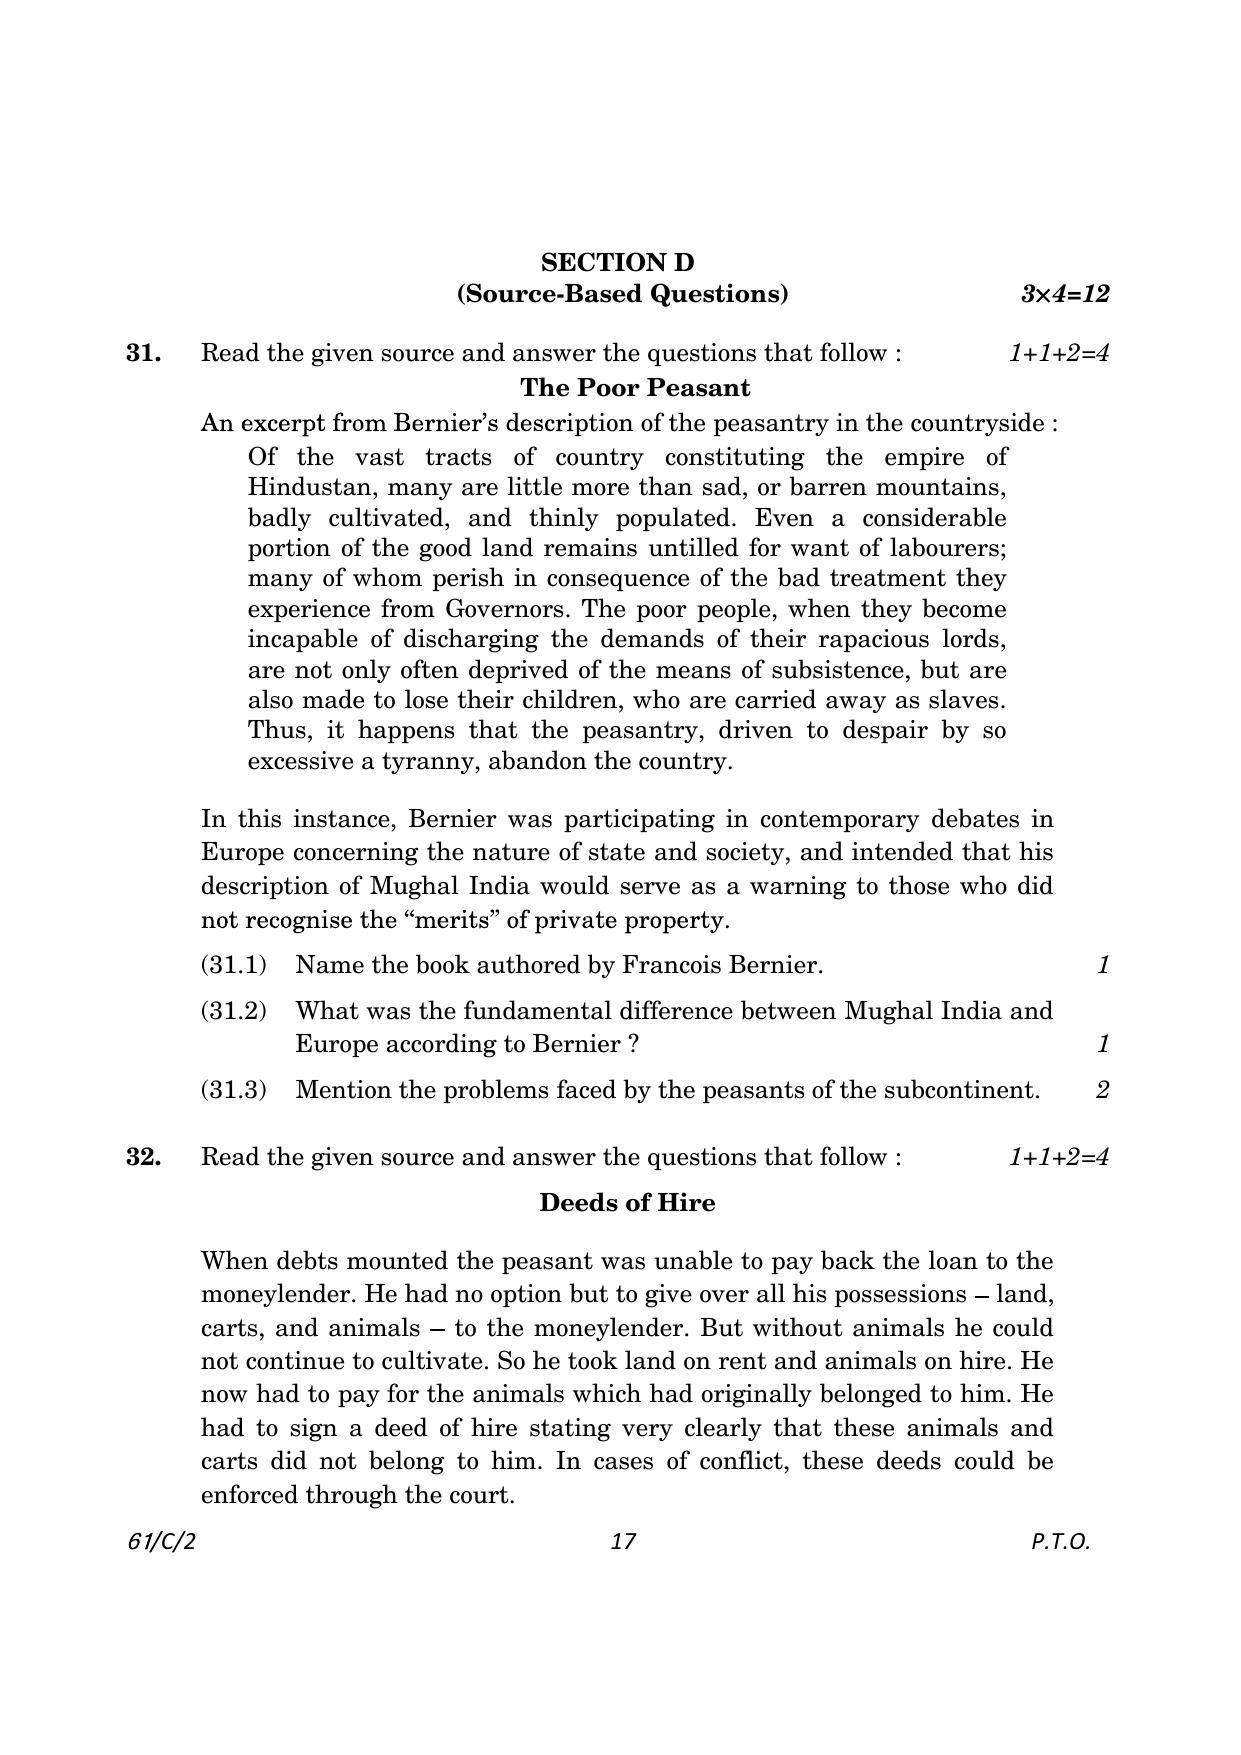 CBSE Class 12 61-2 History 2023 (Compartment) Question Paper - Page 17